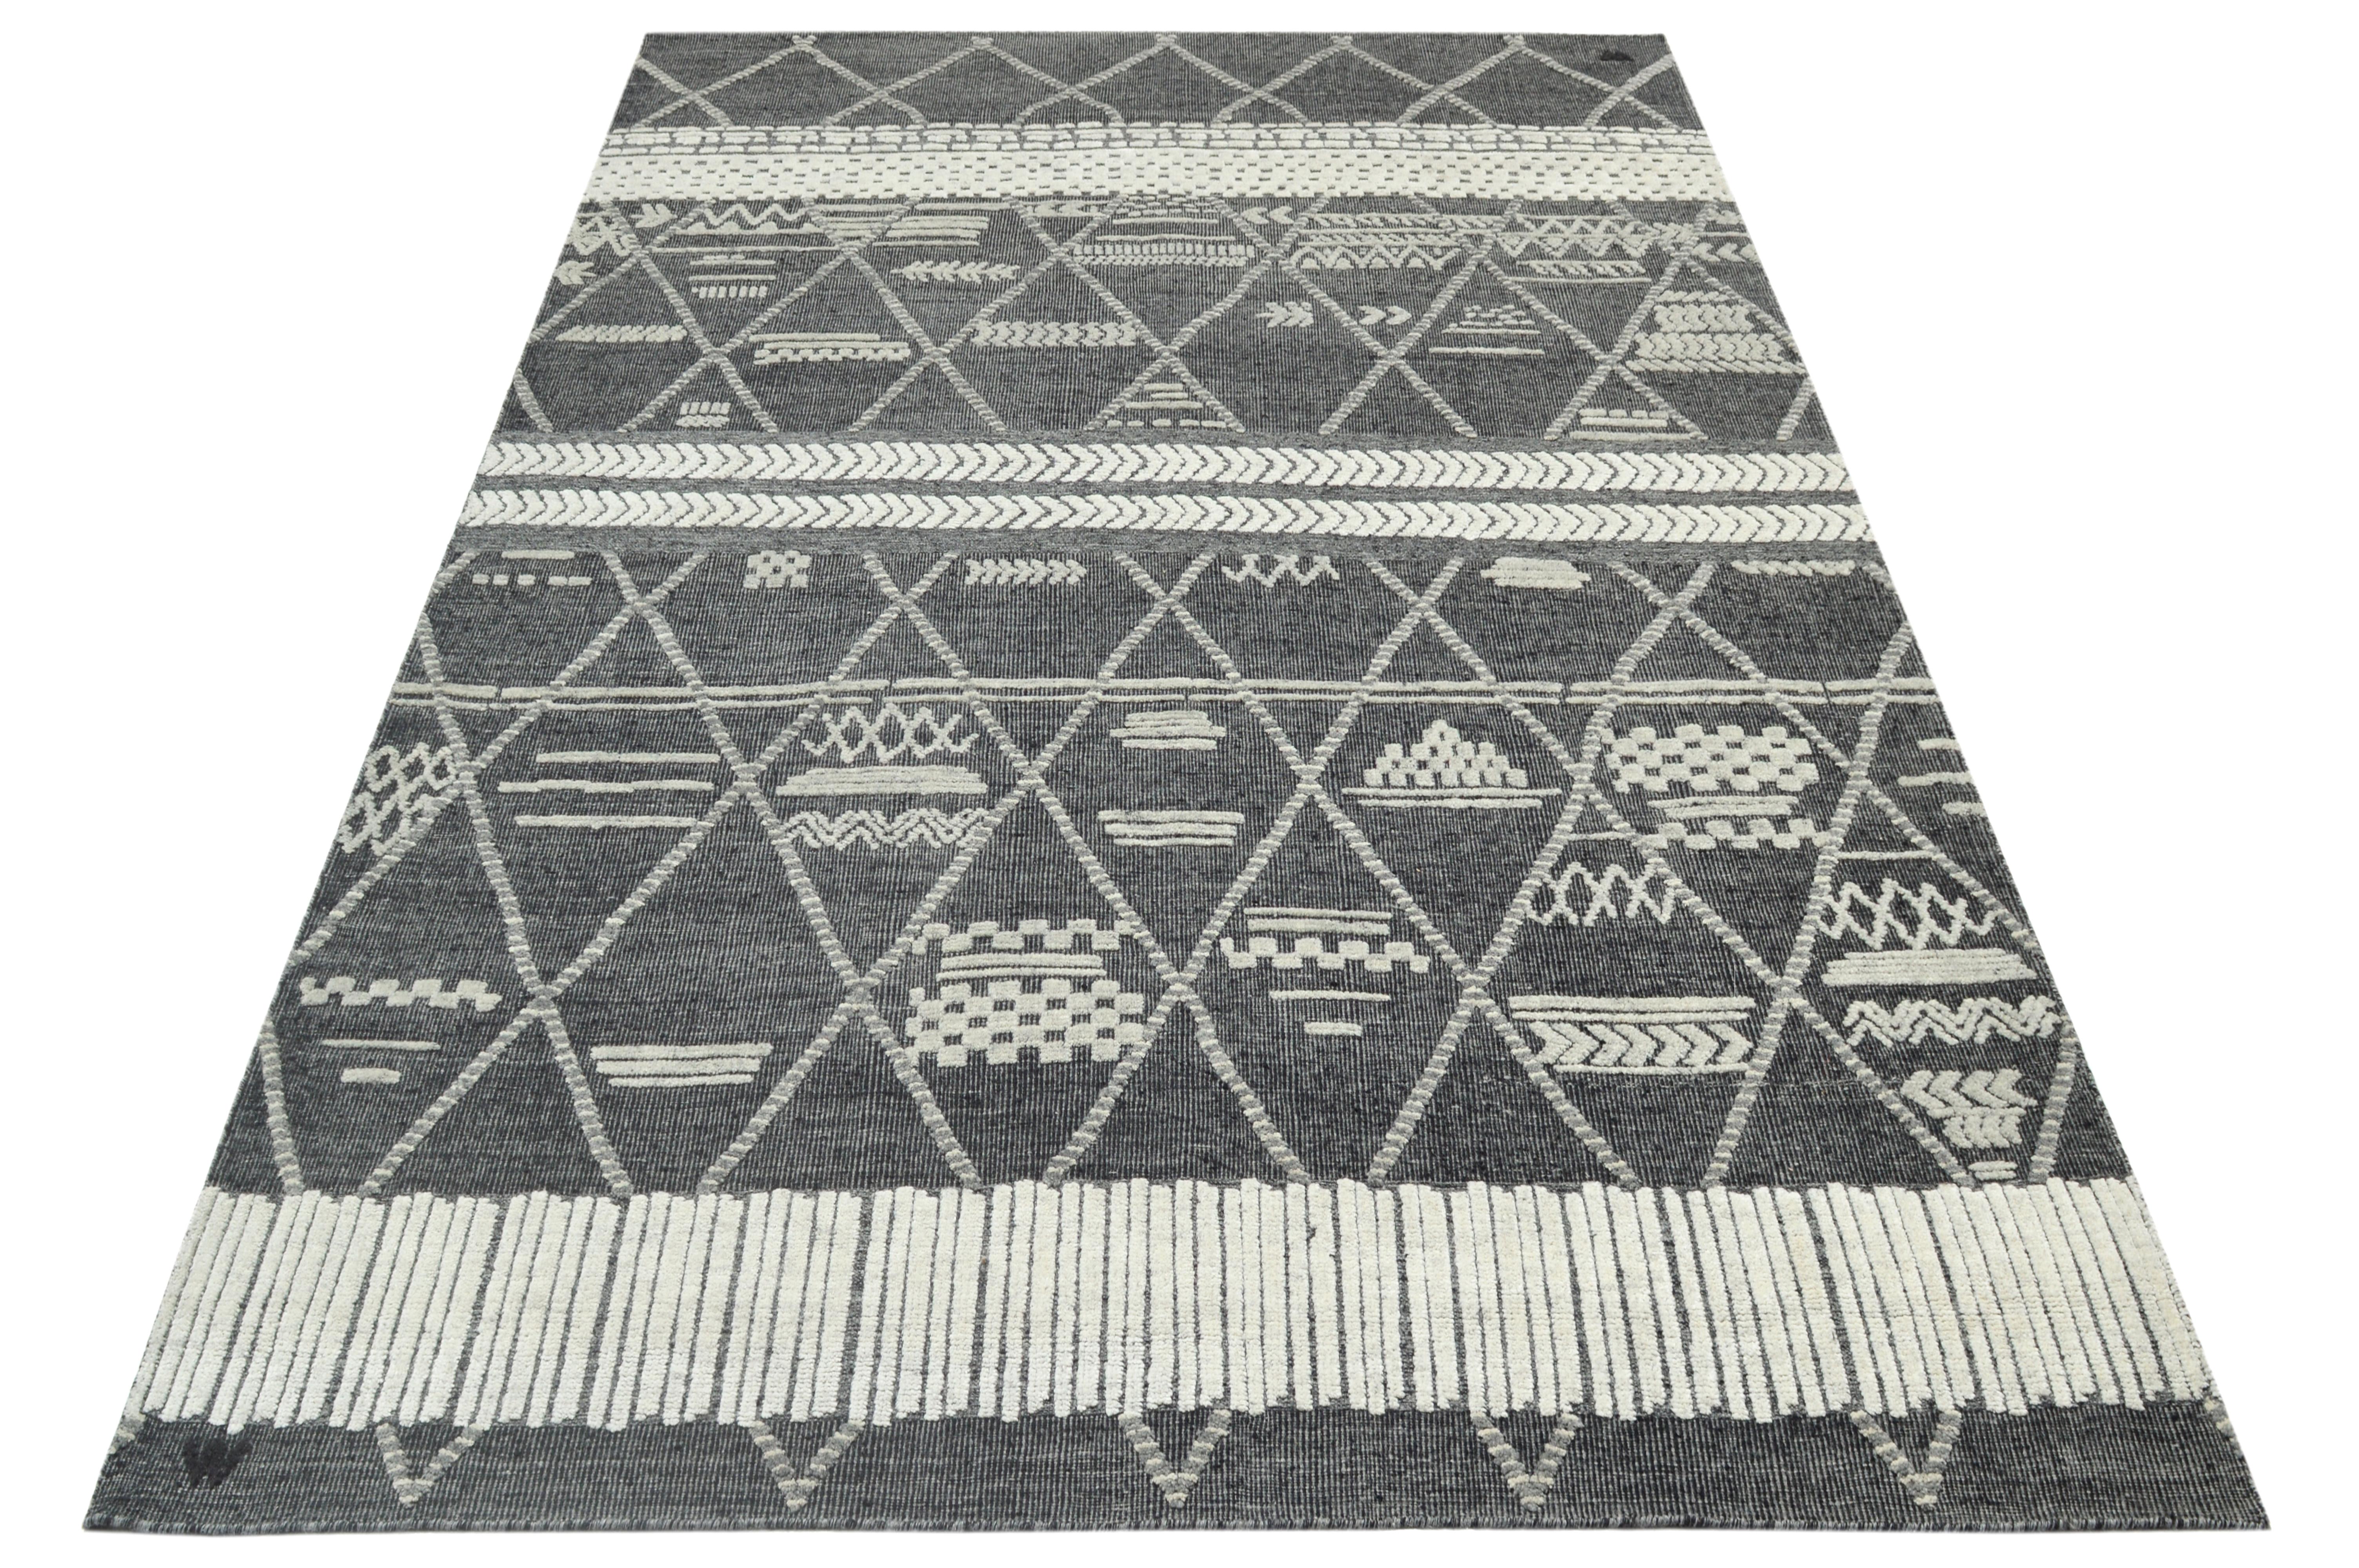 Hand-knotted wool pile on a cotton foundation.

Approximate Dimensions: 10' x 14'

Origin: India

Field color: Charcoal 

Accent color: Silver.